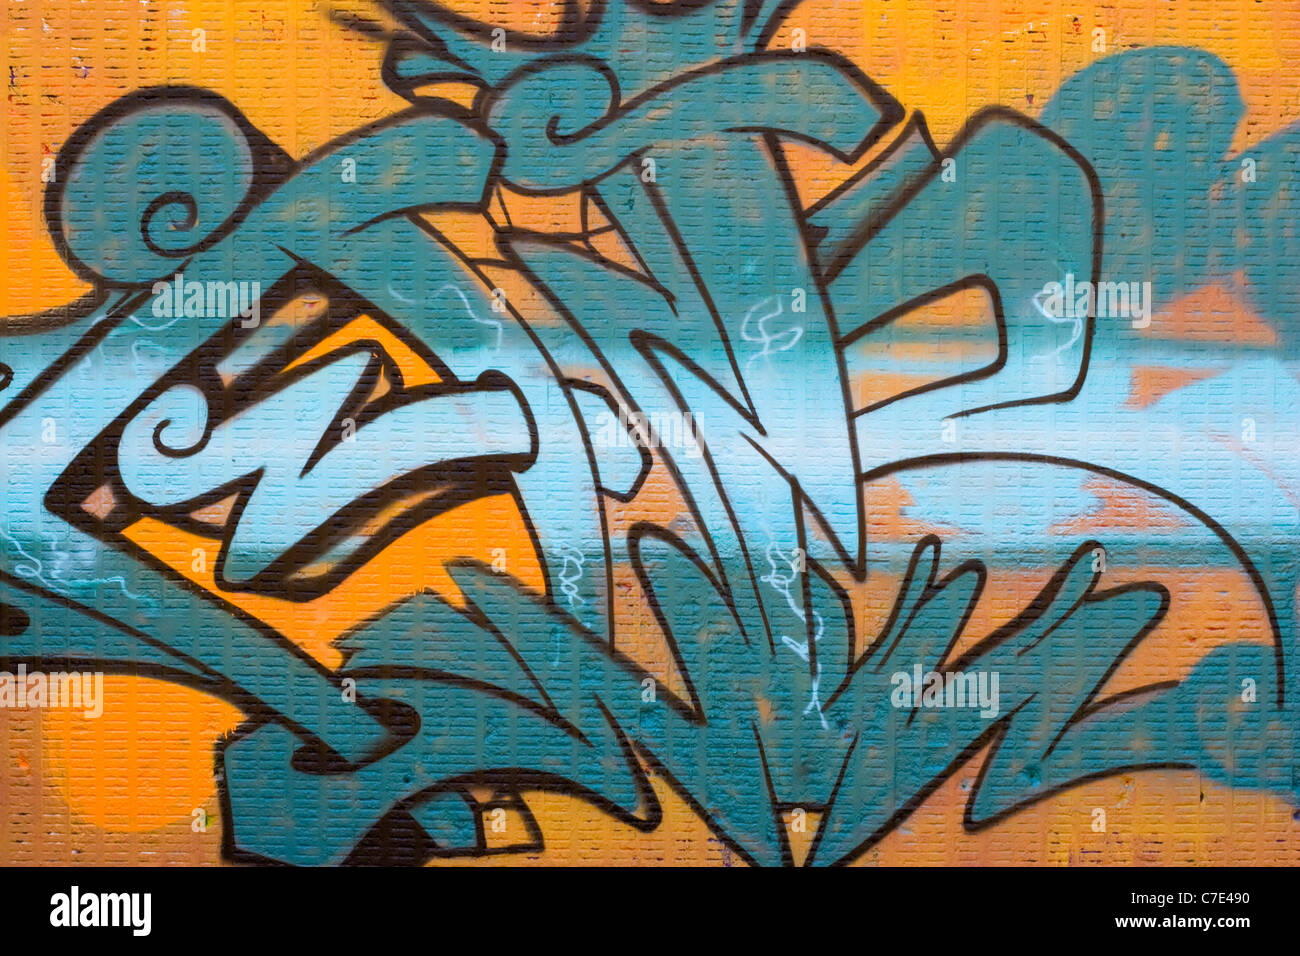 Graffiti texture - works great as a background or backdrop in any design. Stock Photo